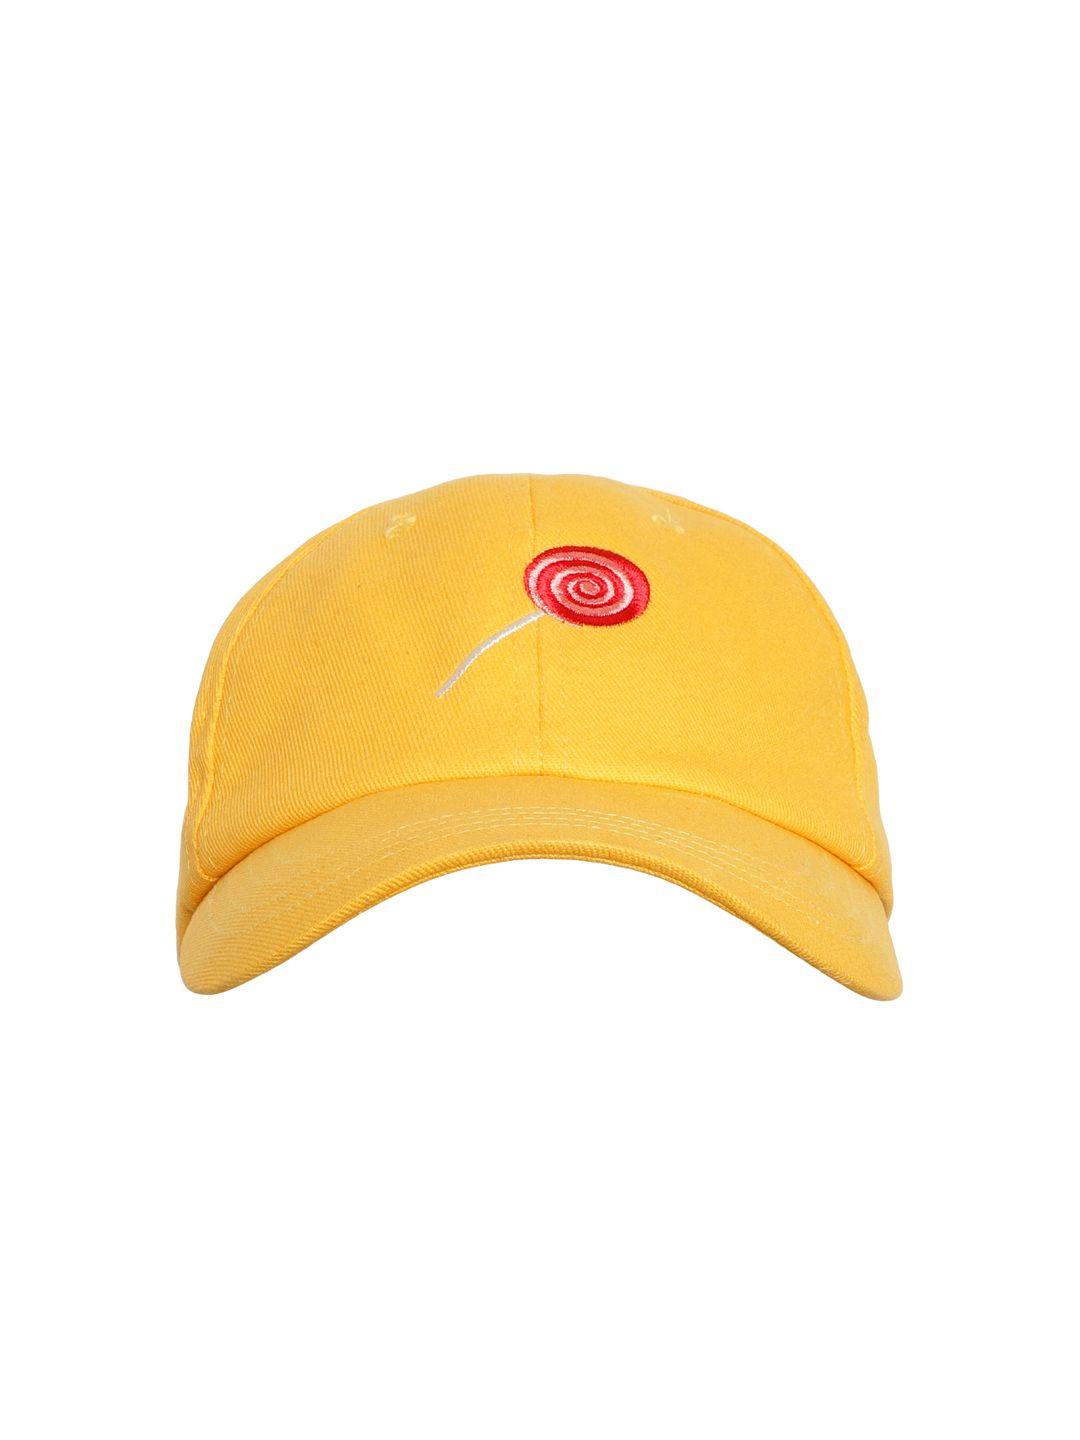 blueberry unisex yellow & red embroidered baseball cap